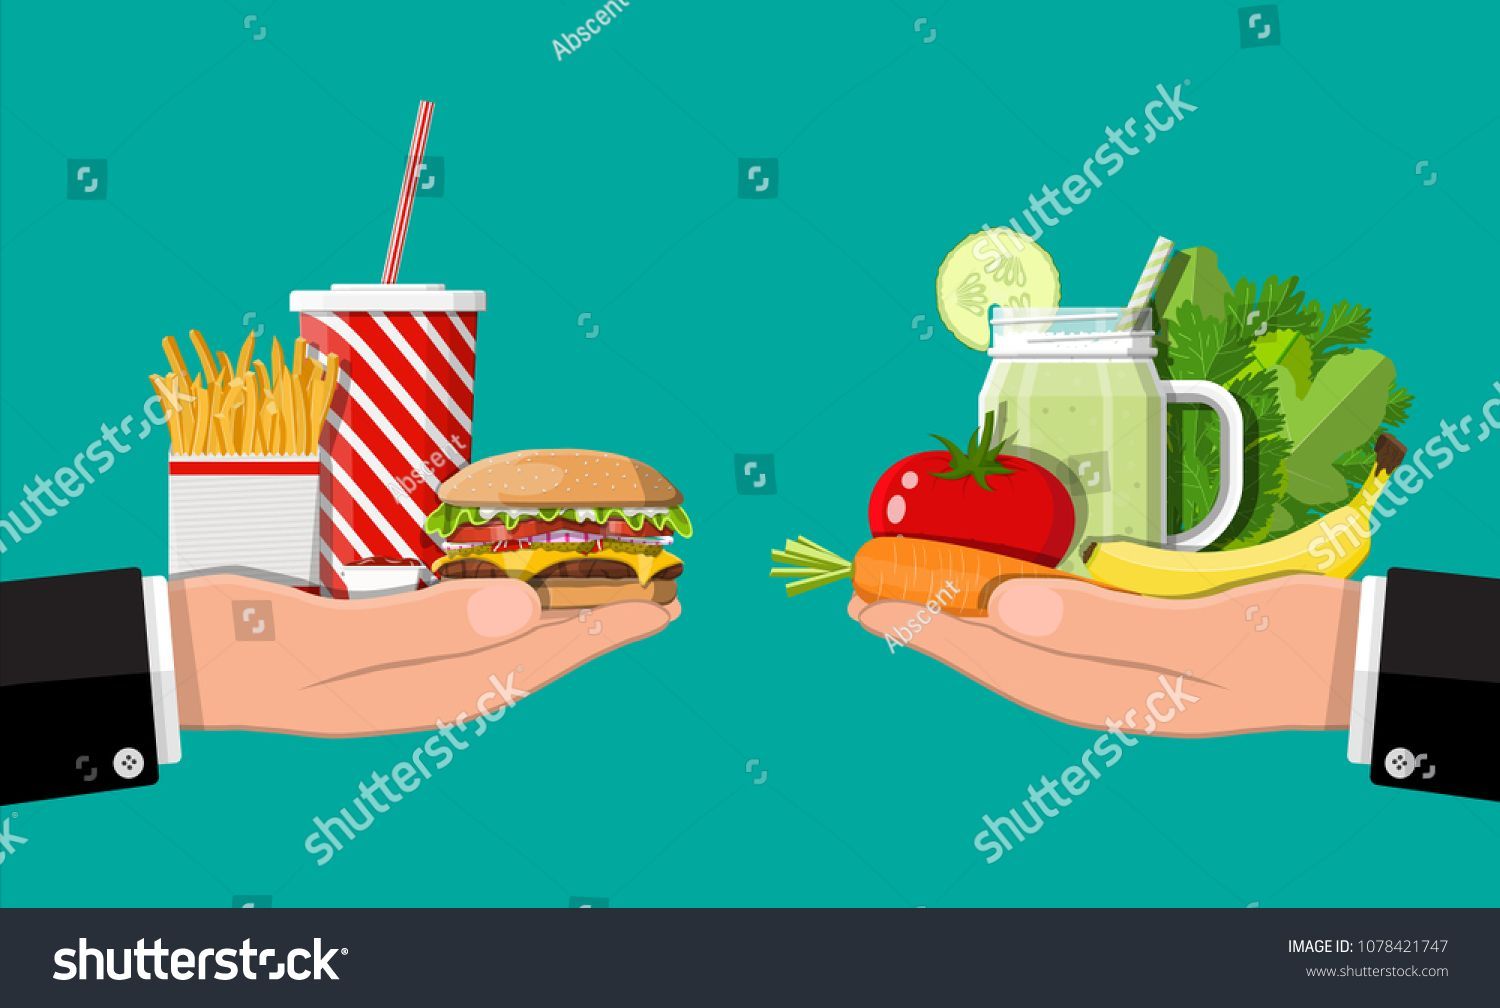 Hands Fast Food Organic Products Diet Stock Vector (Royalty Free) 1078421747 -   12 diet Illustration products ideas